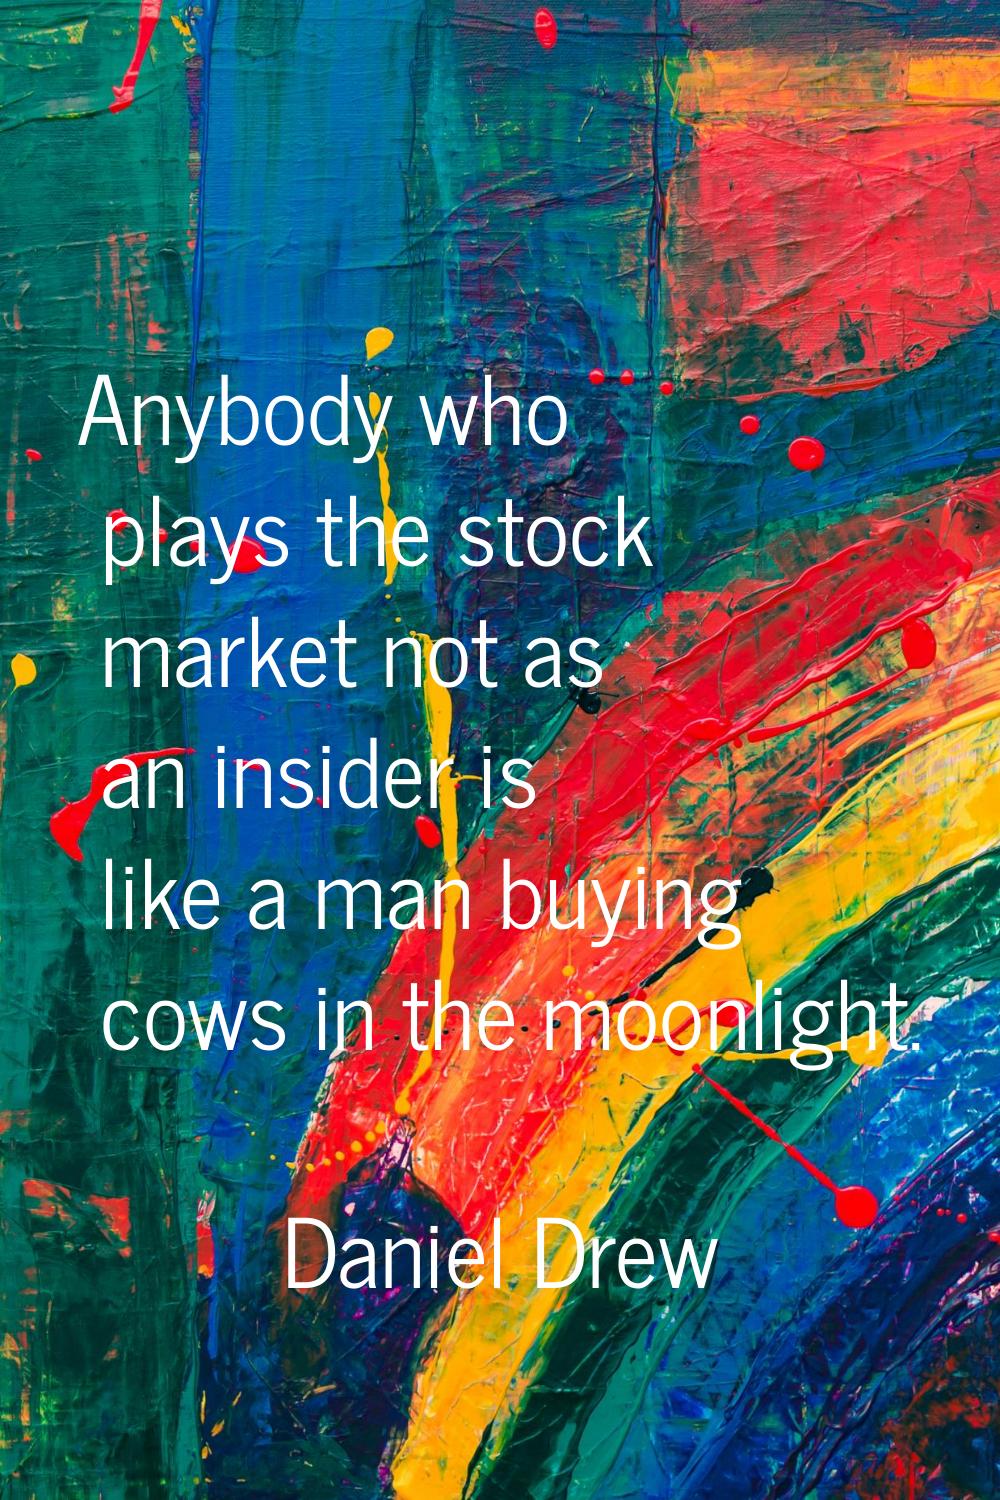 Anybody who plays the stock market not as an insider is like a man buying cows in the moonlight.